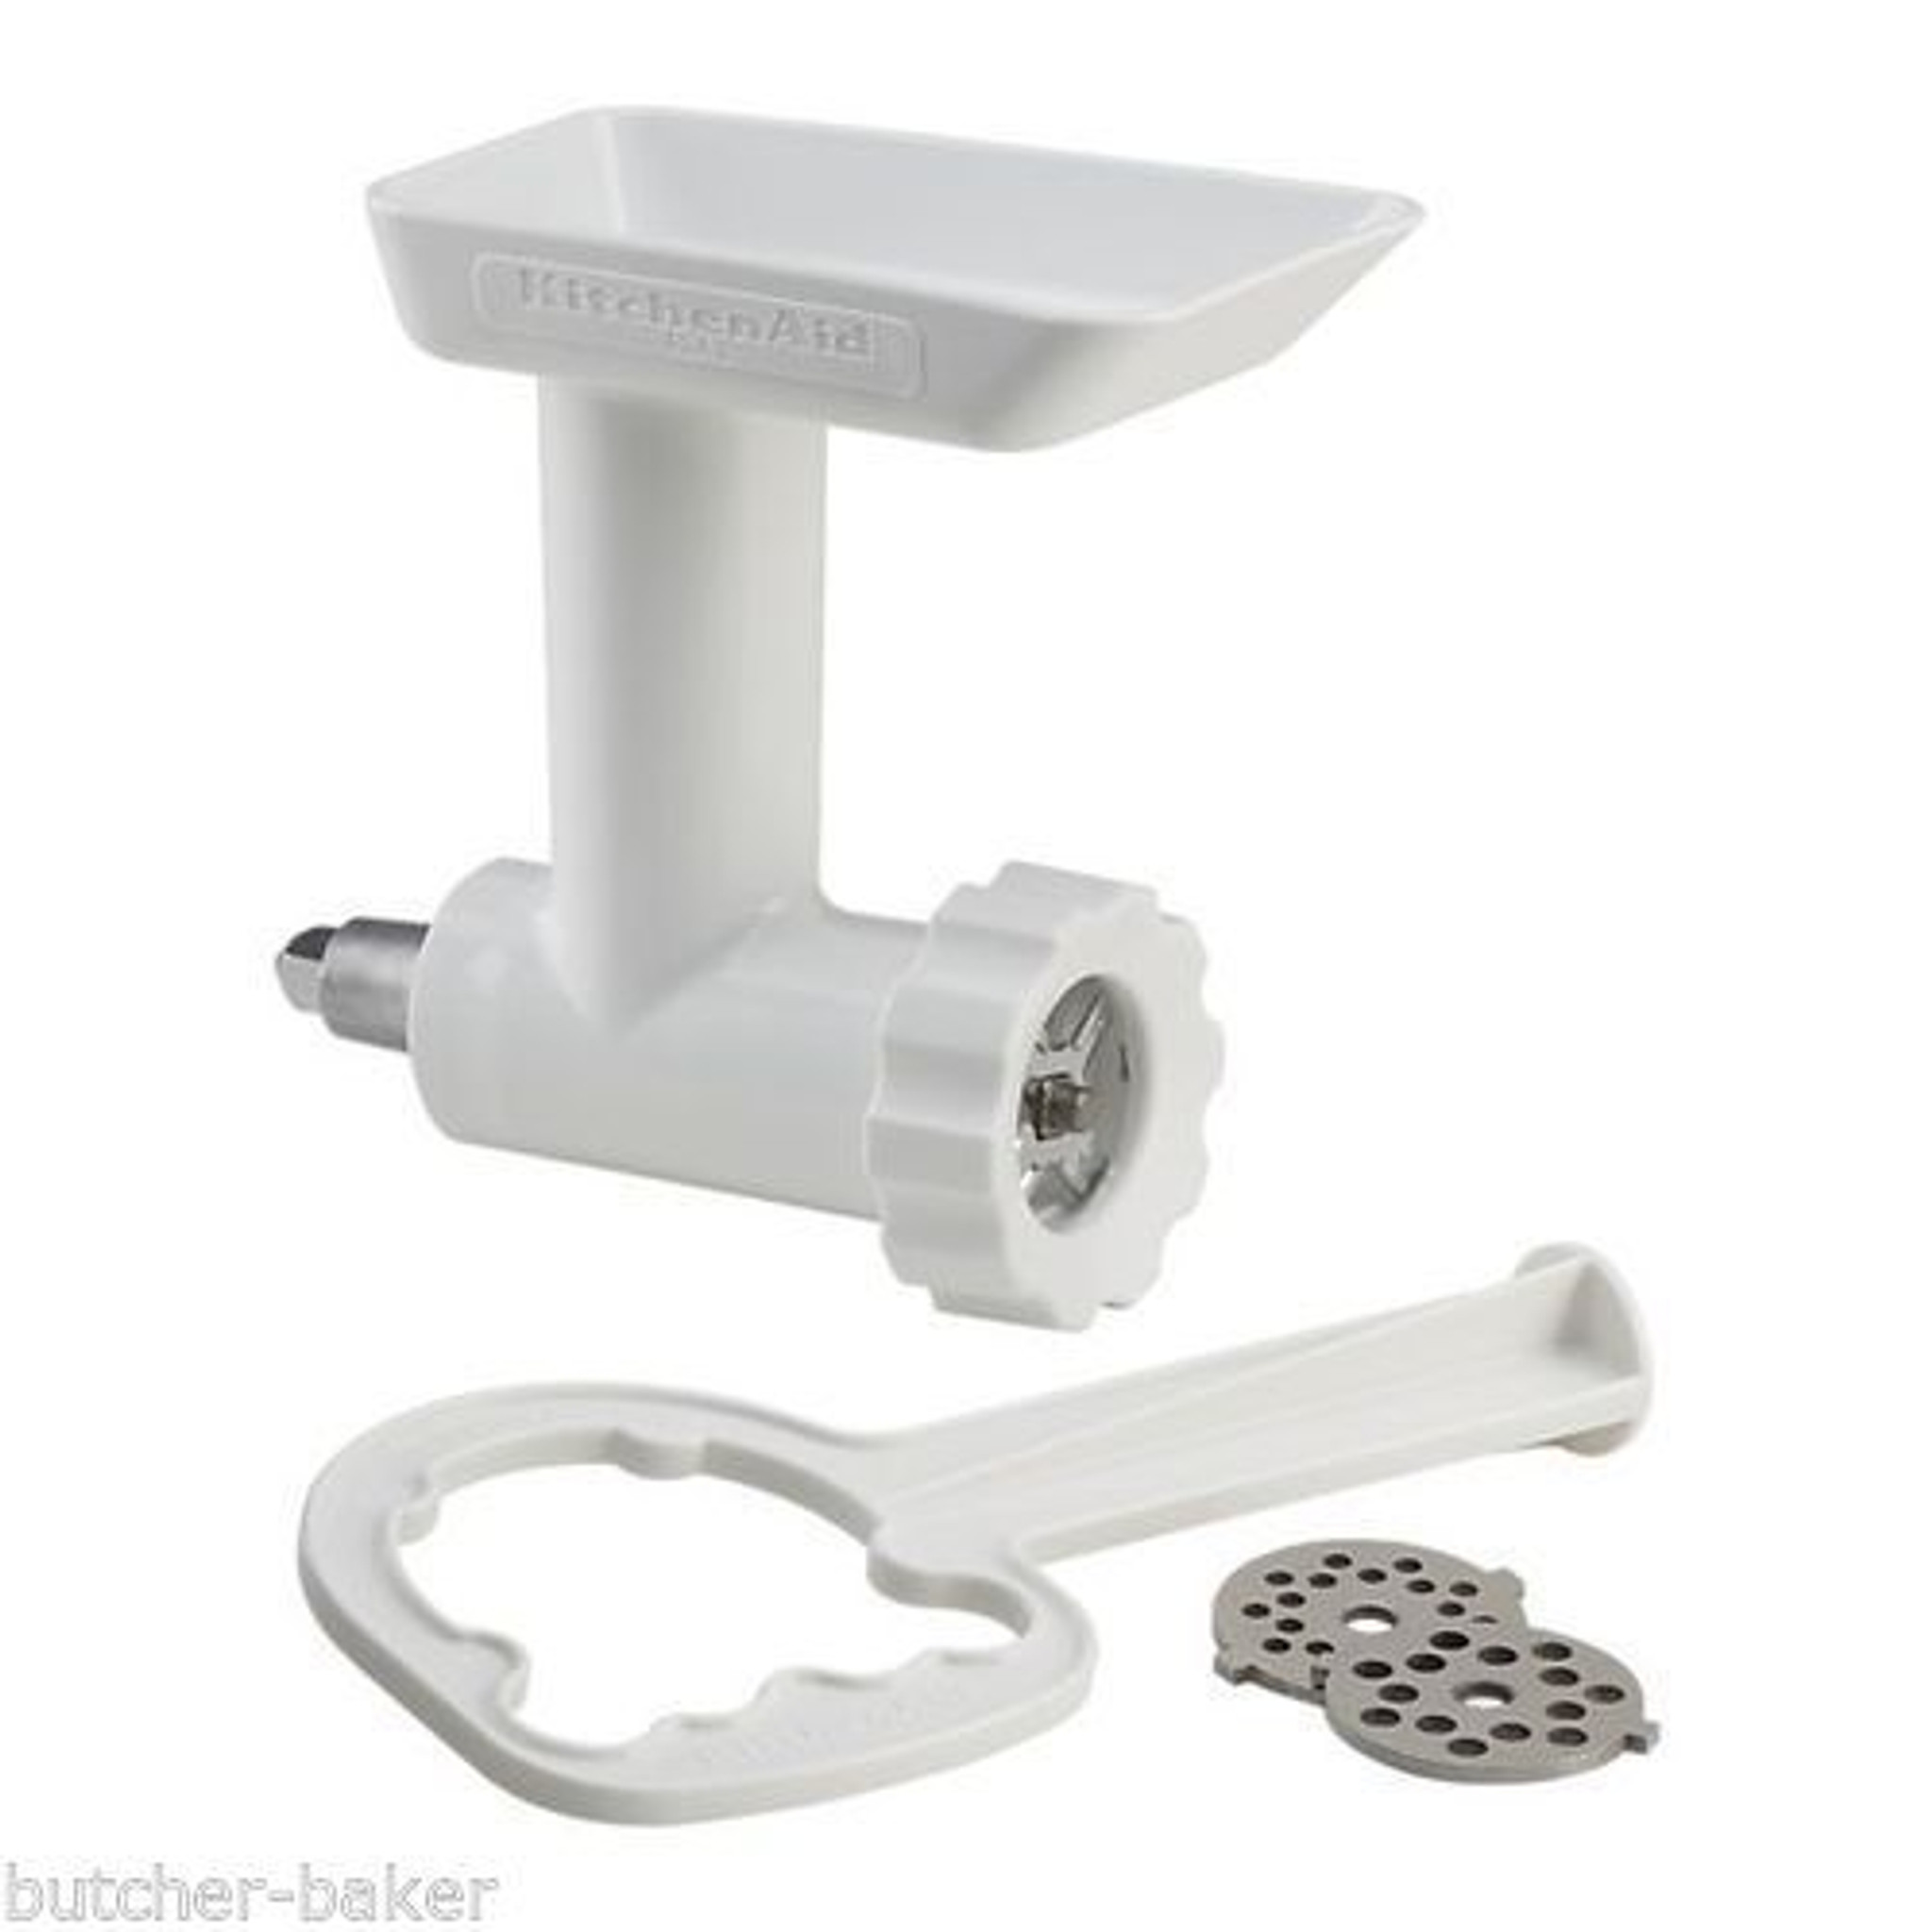 Gdrtwwh Meat Tenderizer Attachments for KitchenAid Stand Mixers,Meat & Poultry Tenderizers(White)